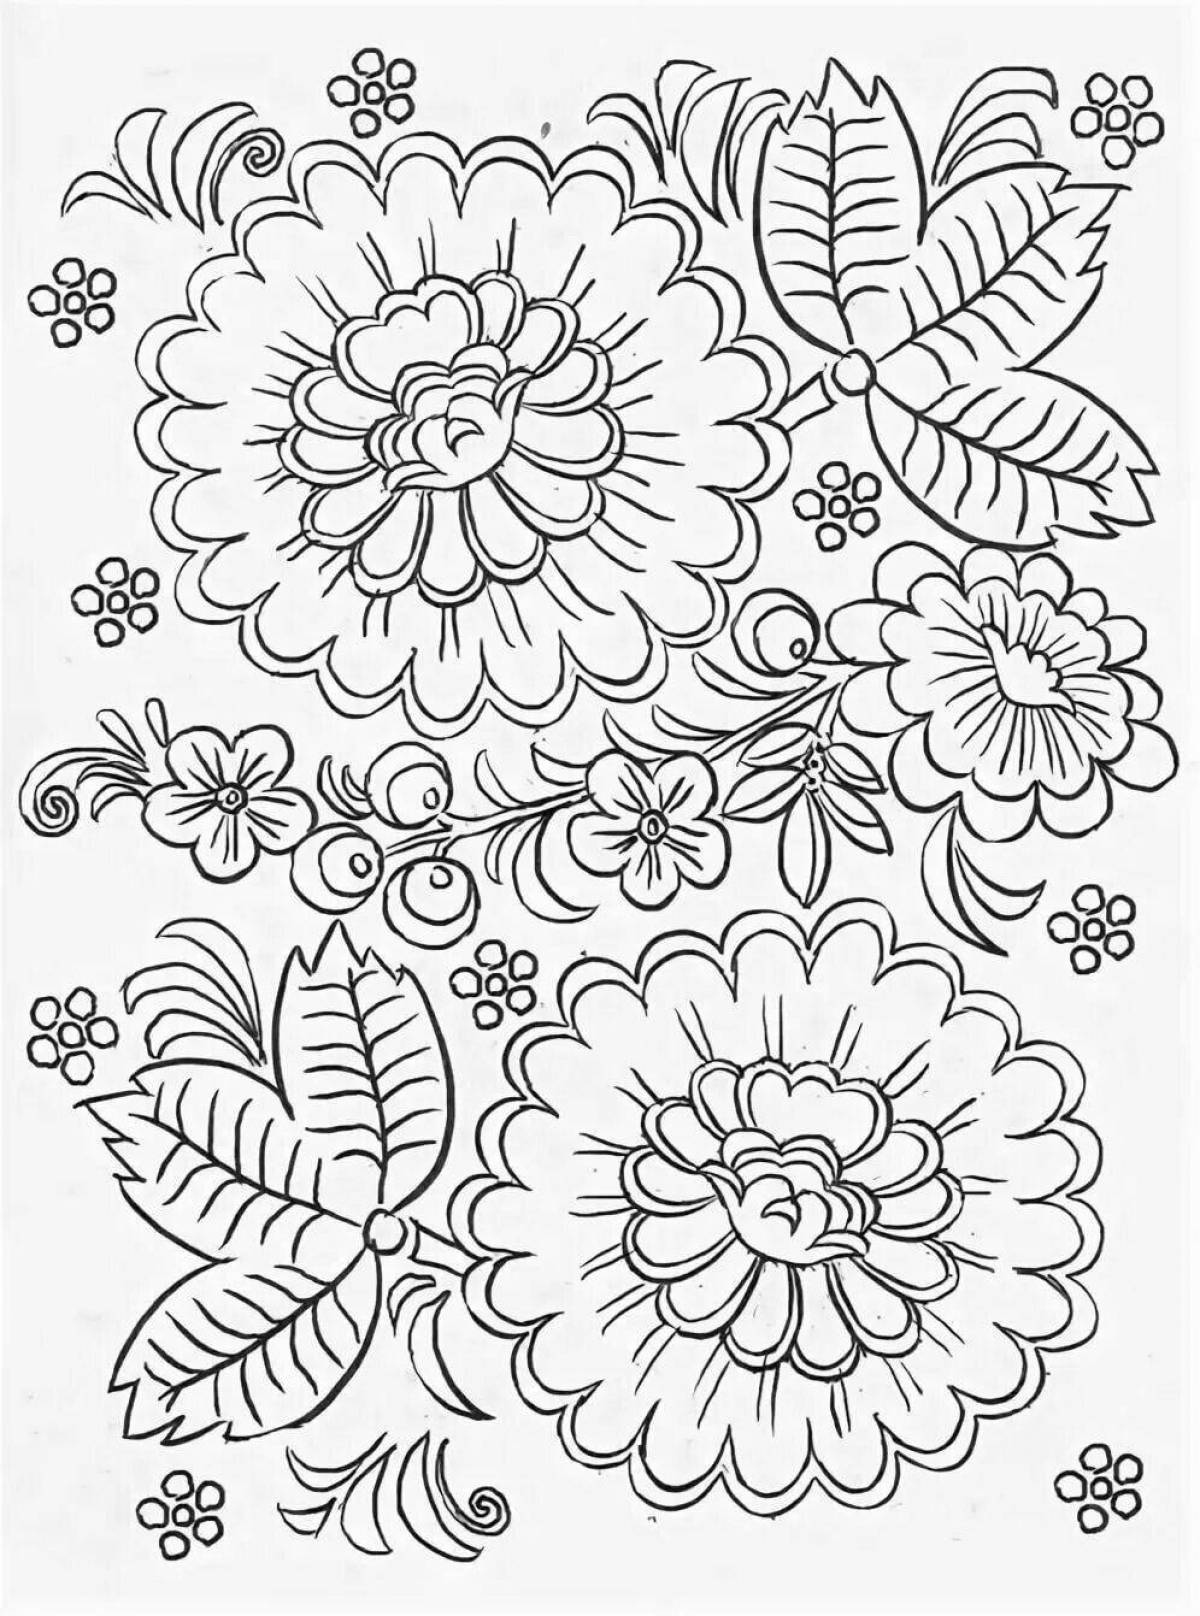 Coloring page intricate Russian ornament